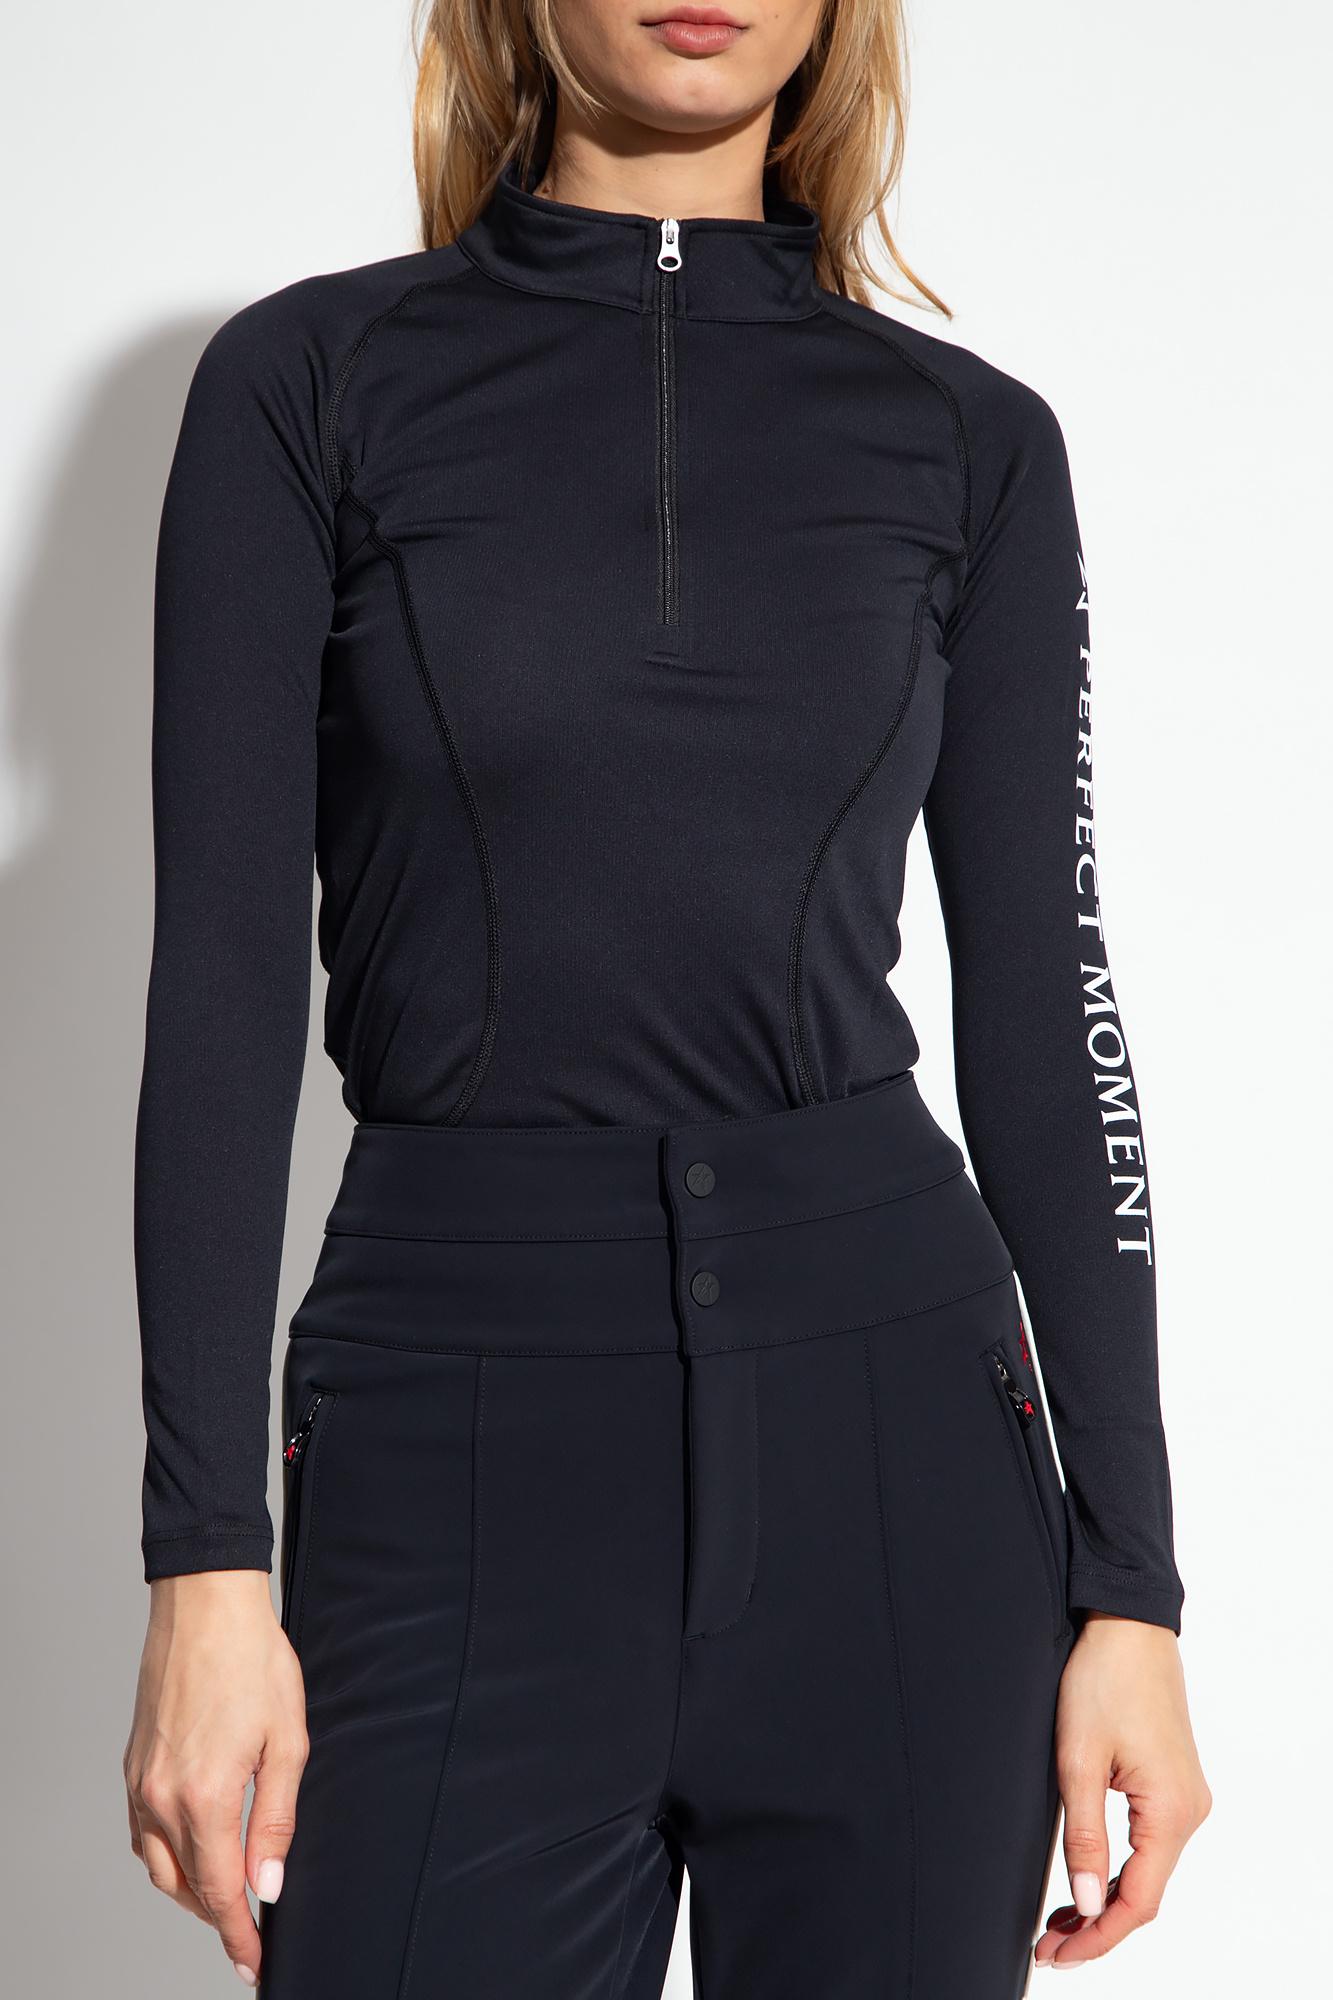 Perfect Moment x Dede Johnston Thermal Base Layer - Farfetch